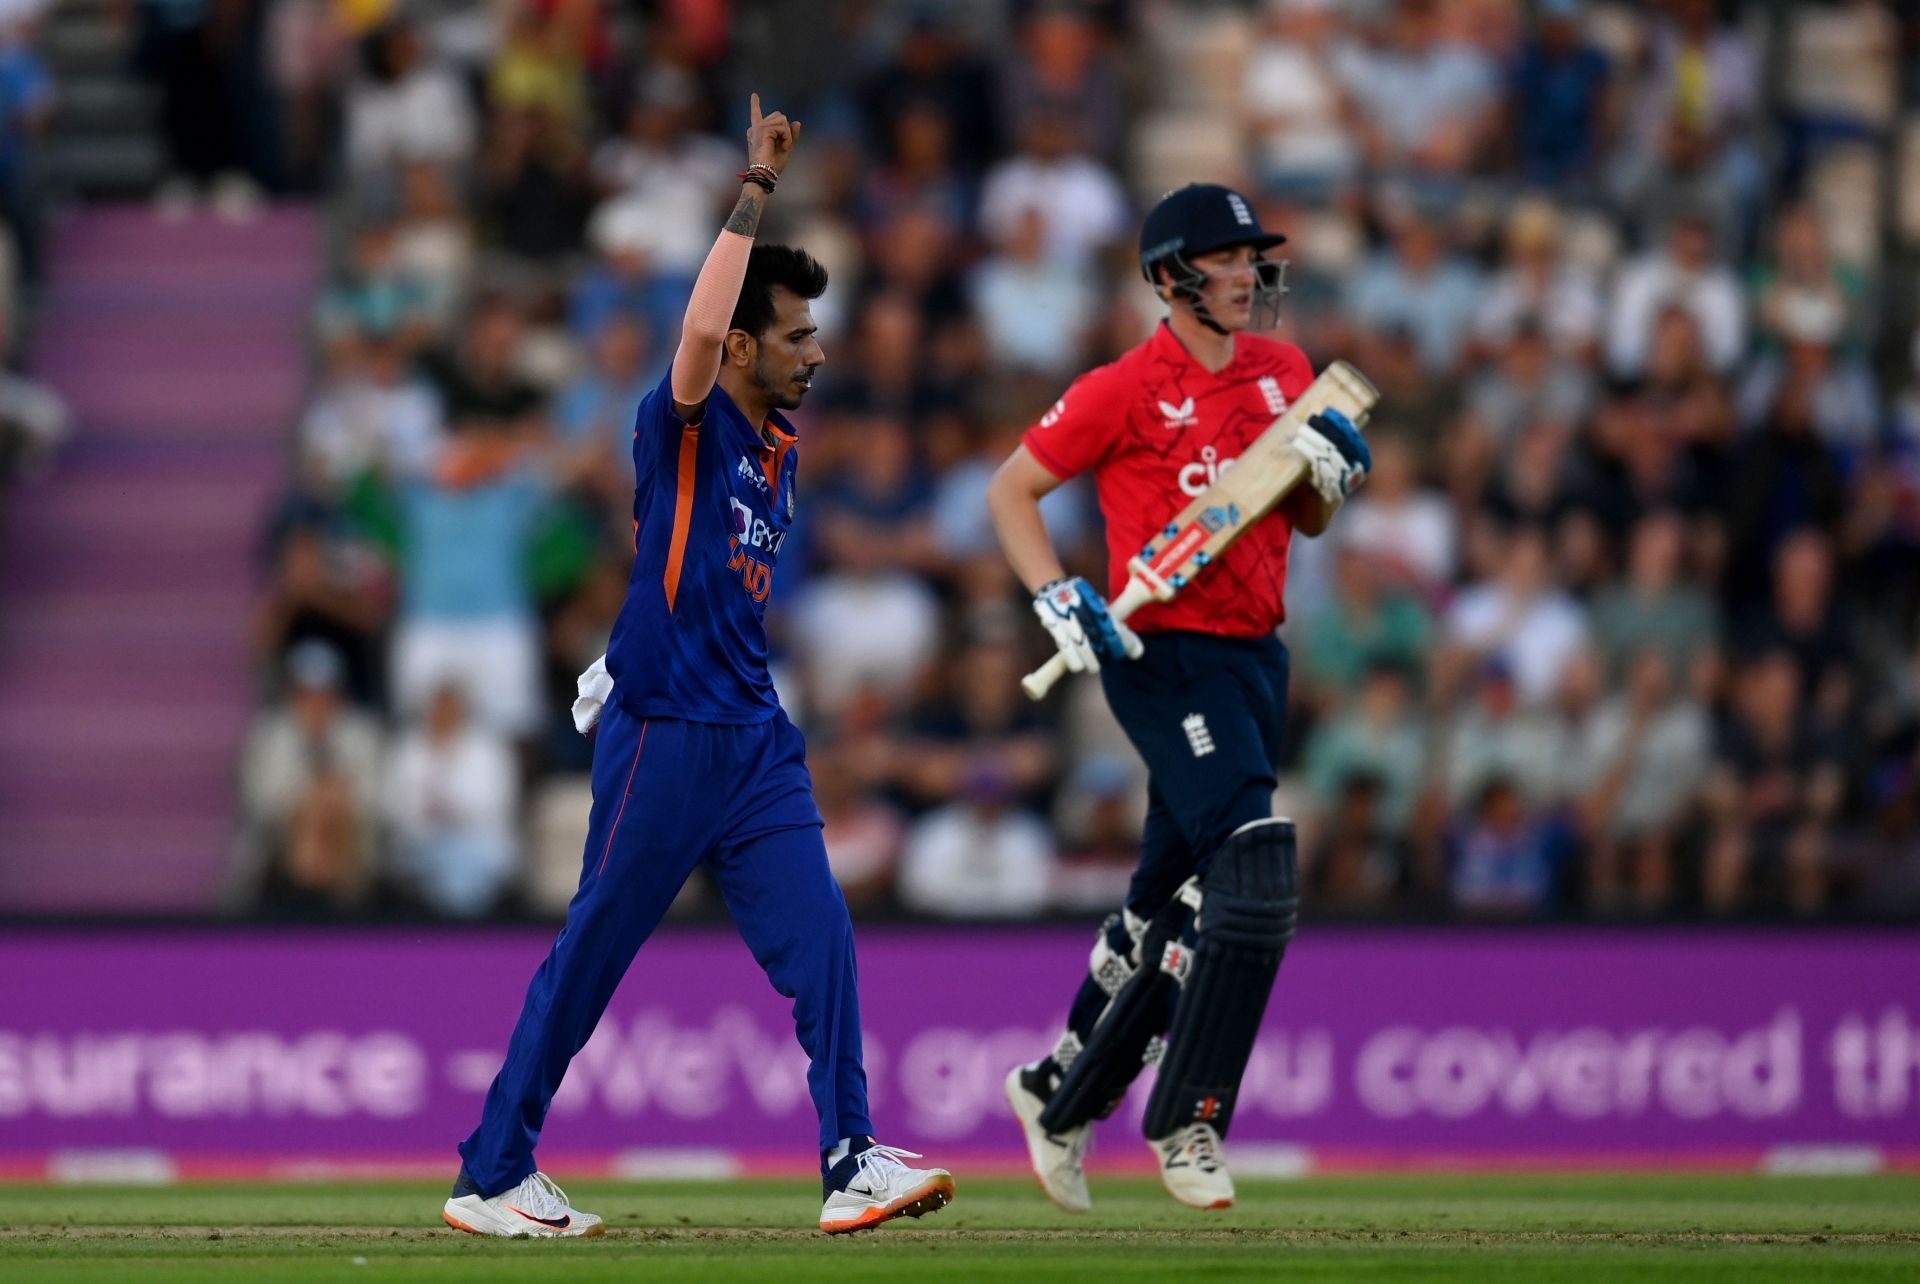 Yuzvendra Chahal snared a couple of wickets in the first T20I against England